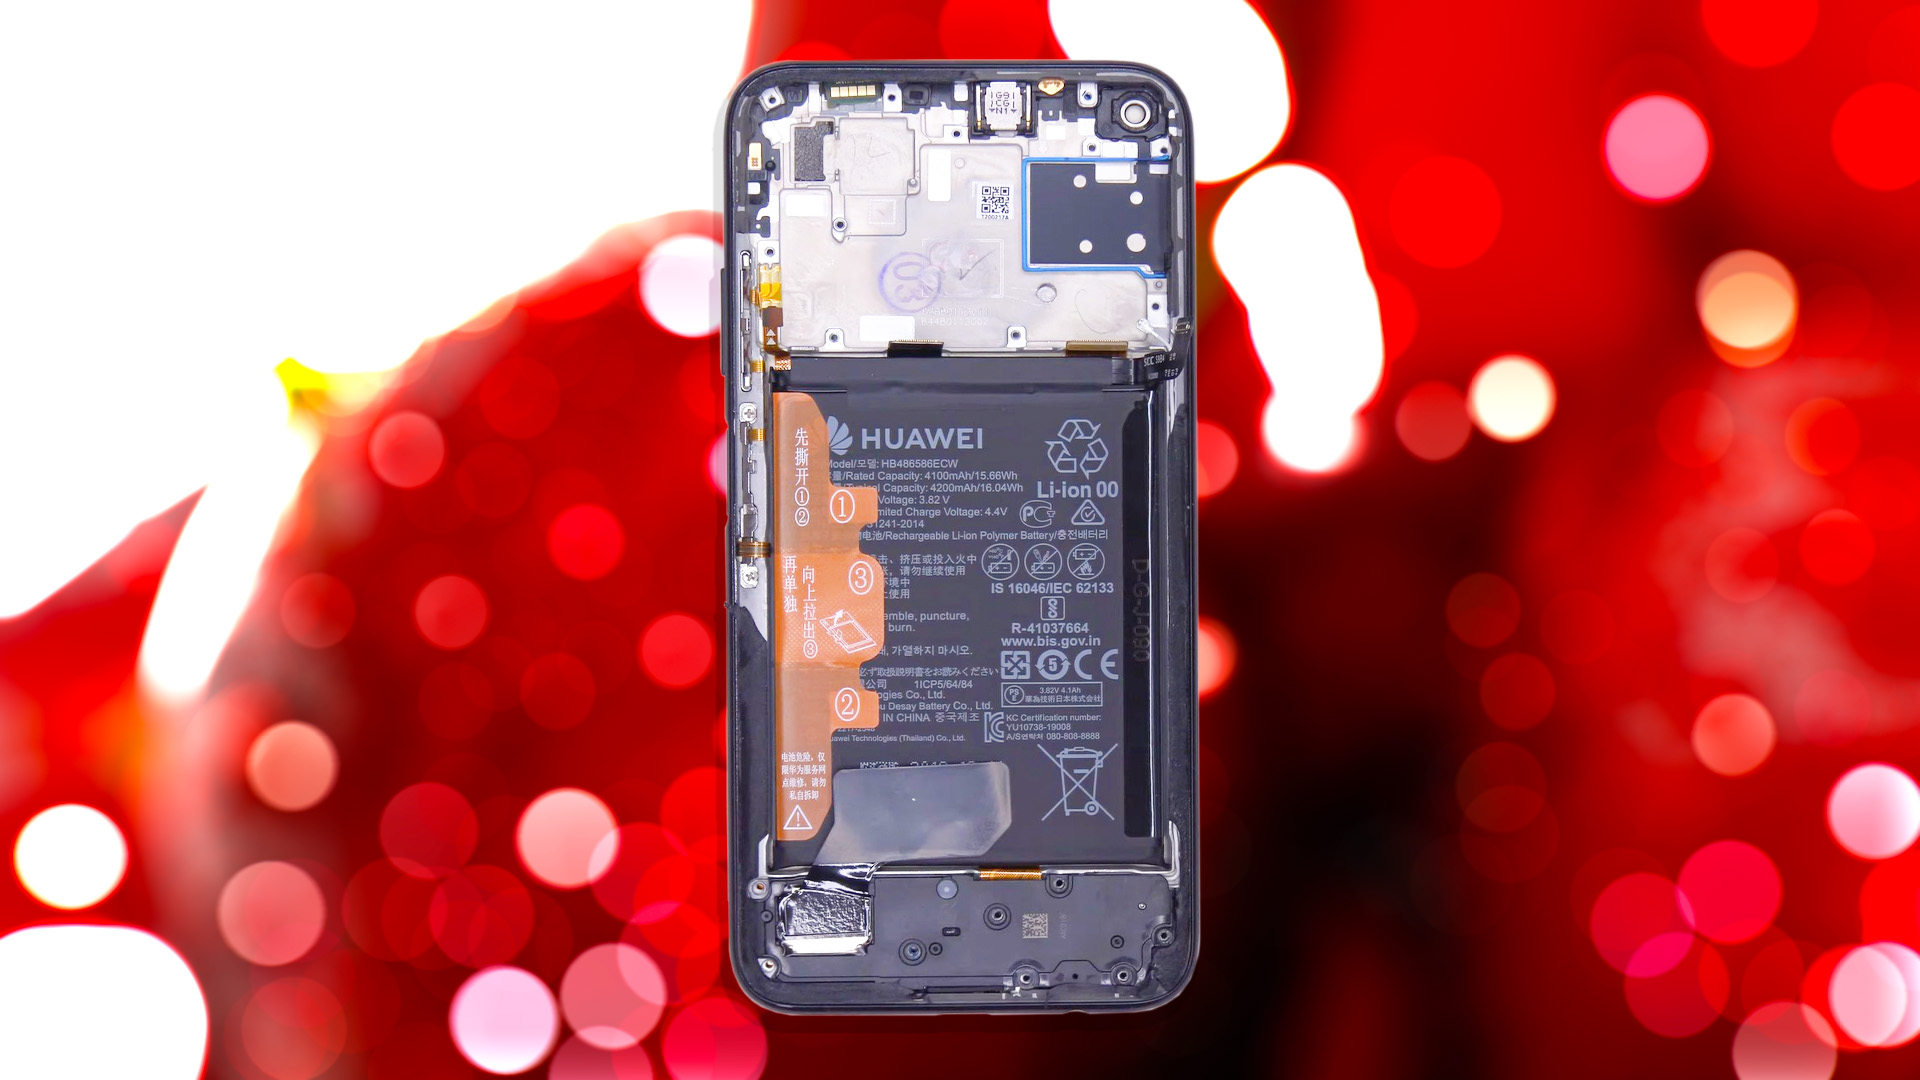 The Huawei P40 Lite proved to be easy to disassemble